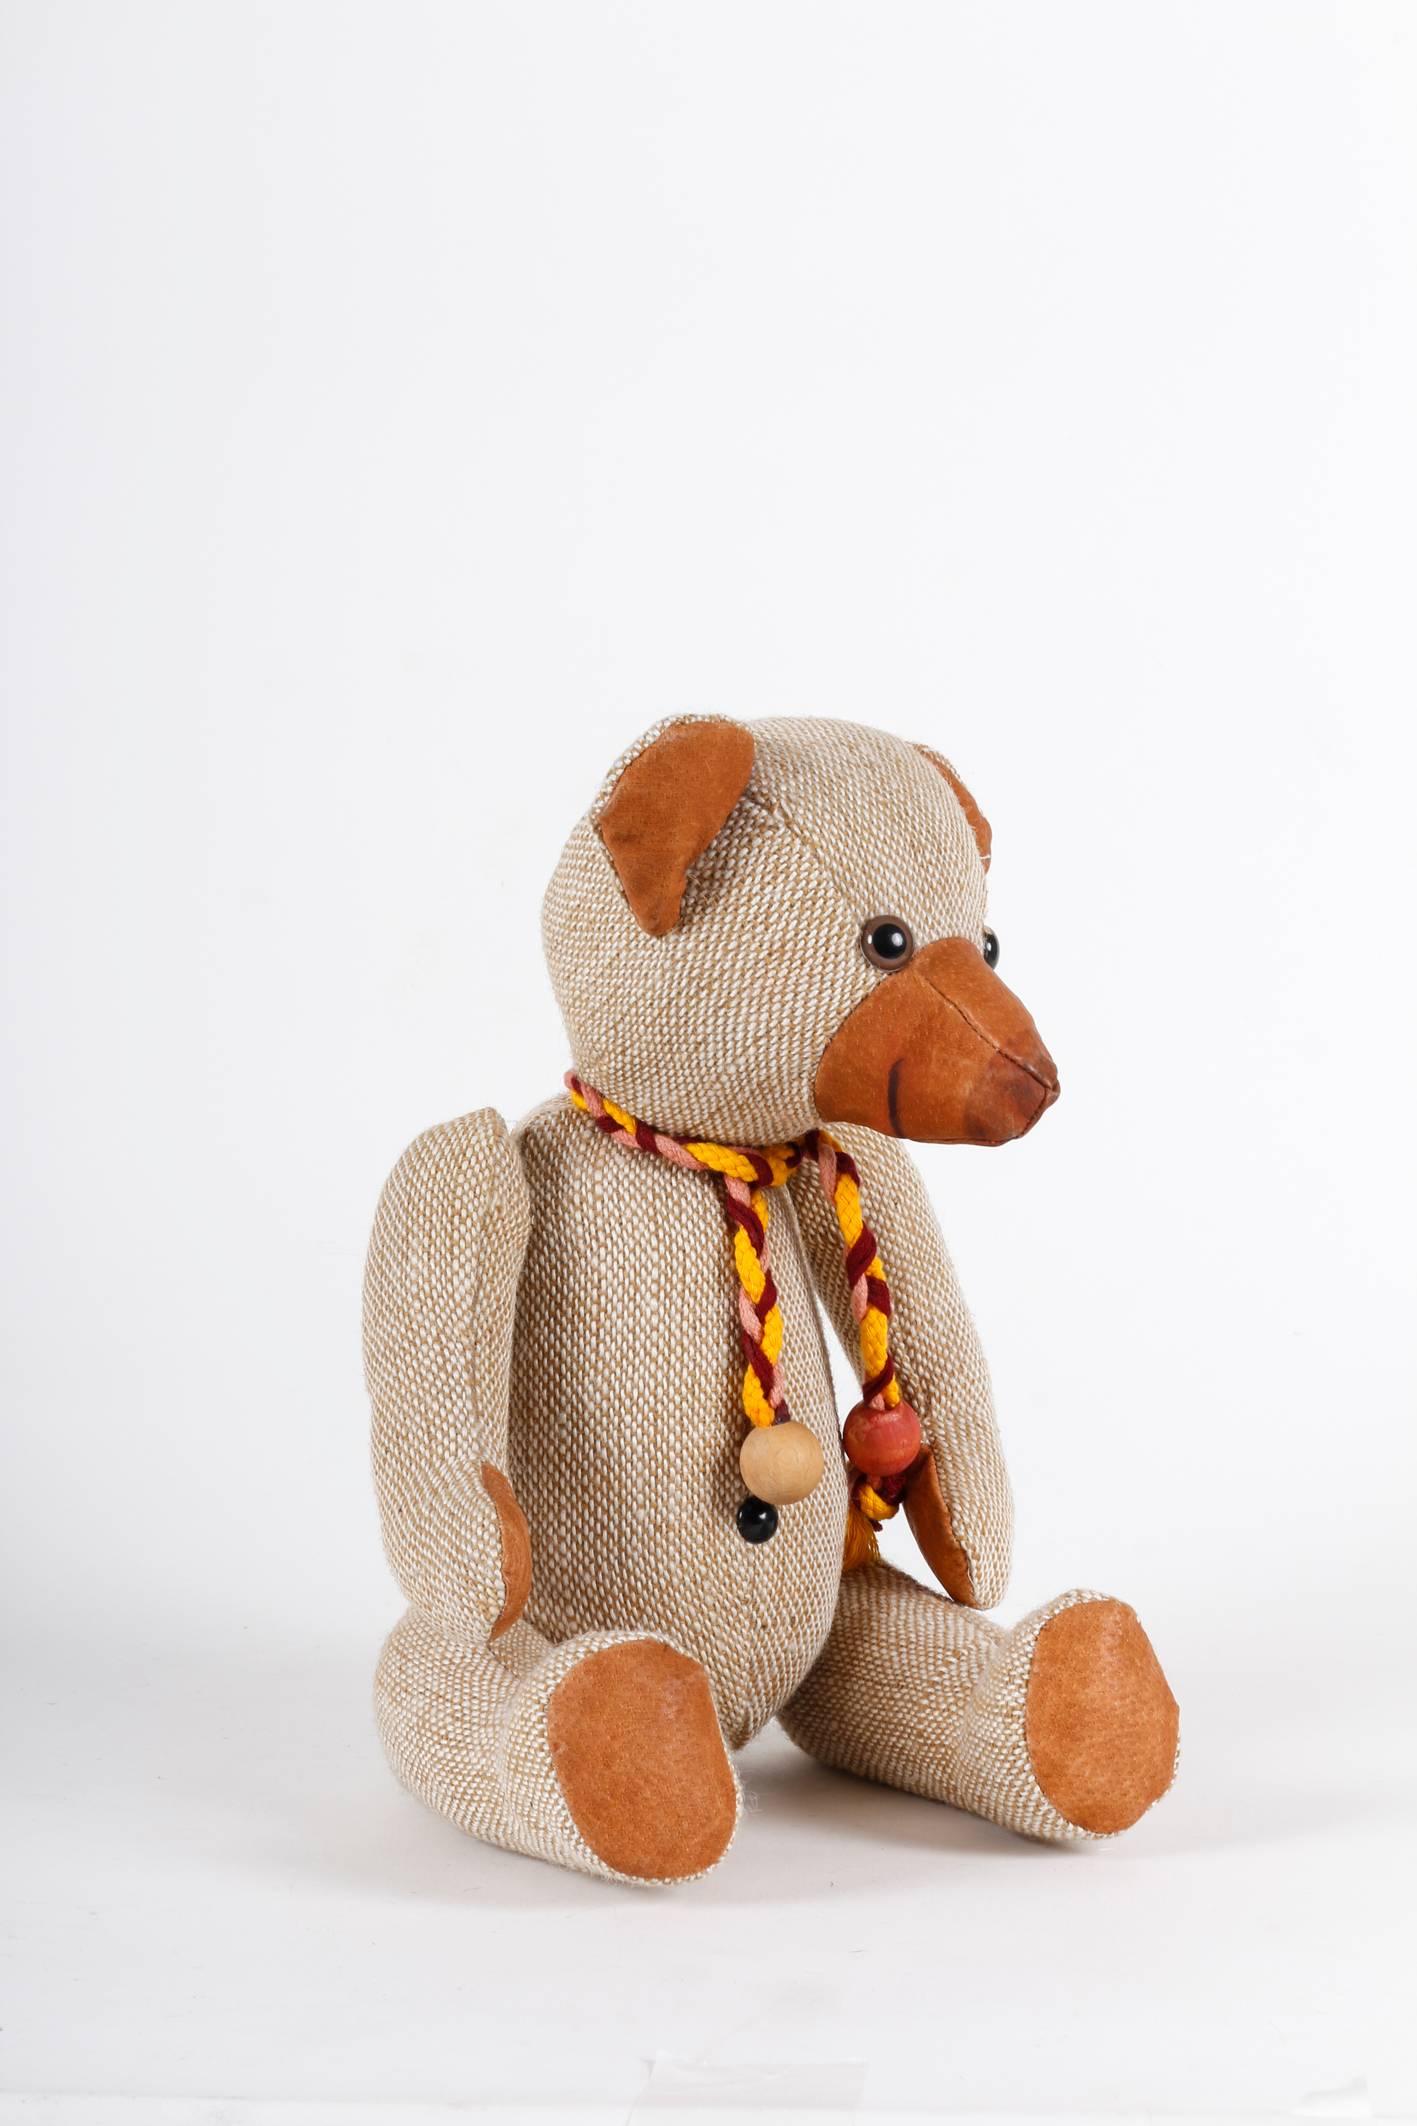 A buzzing bear made by Renate Müller just before her retirement.
Dated 2/9/2009 and signed on the back.

Please find our other listings of toys by Renate Müller.